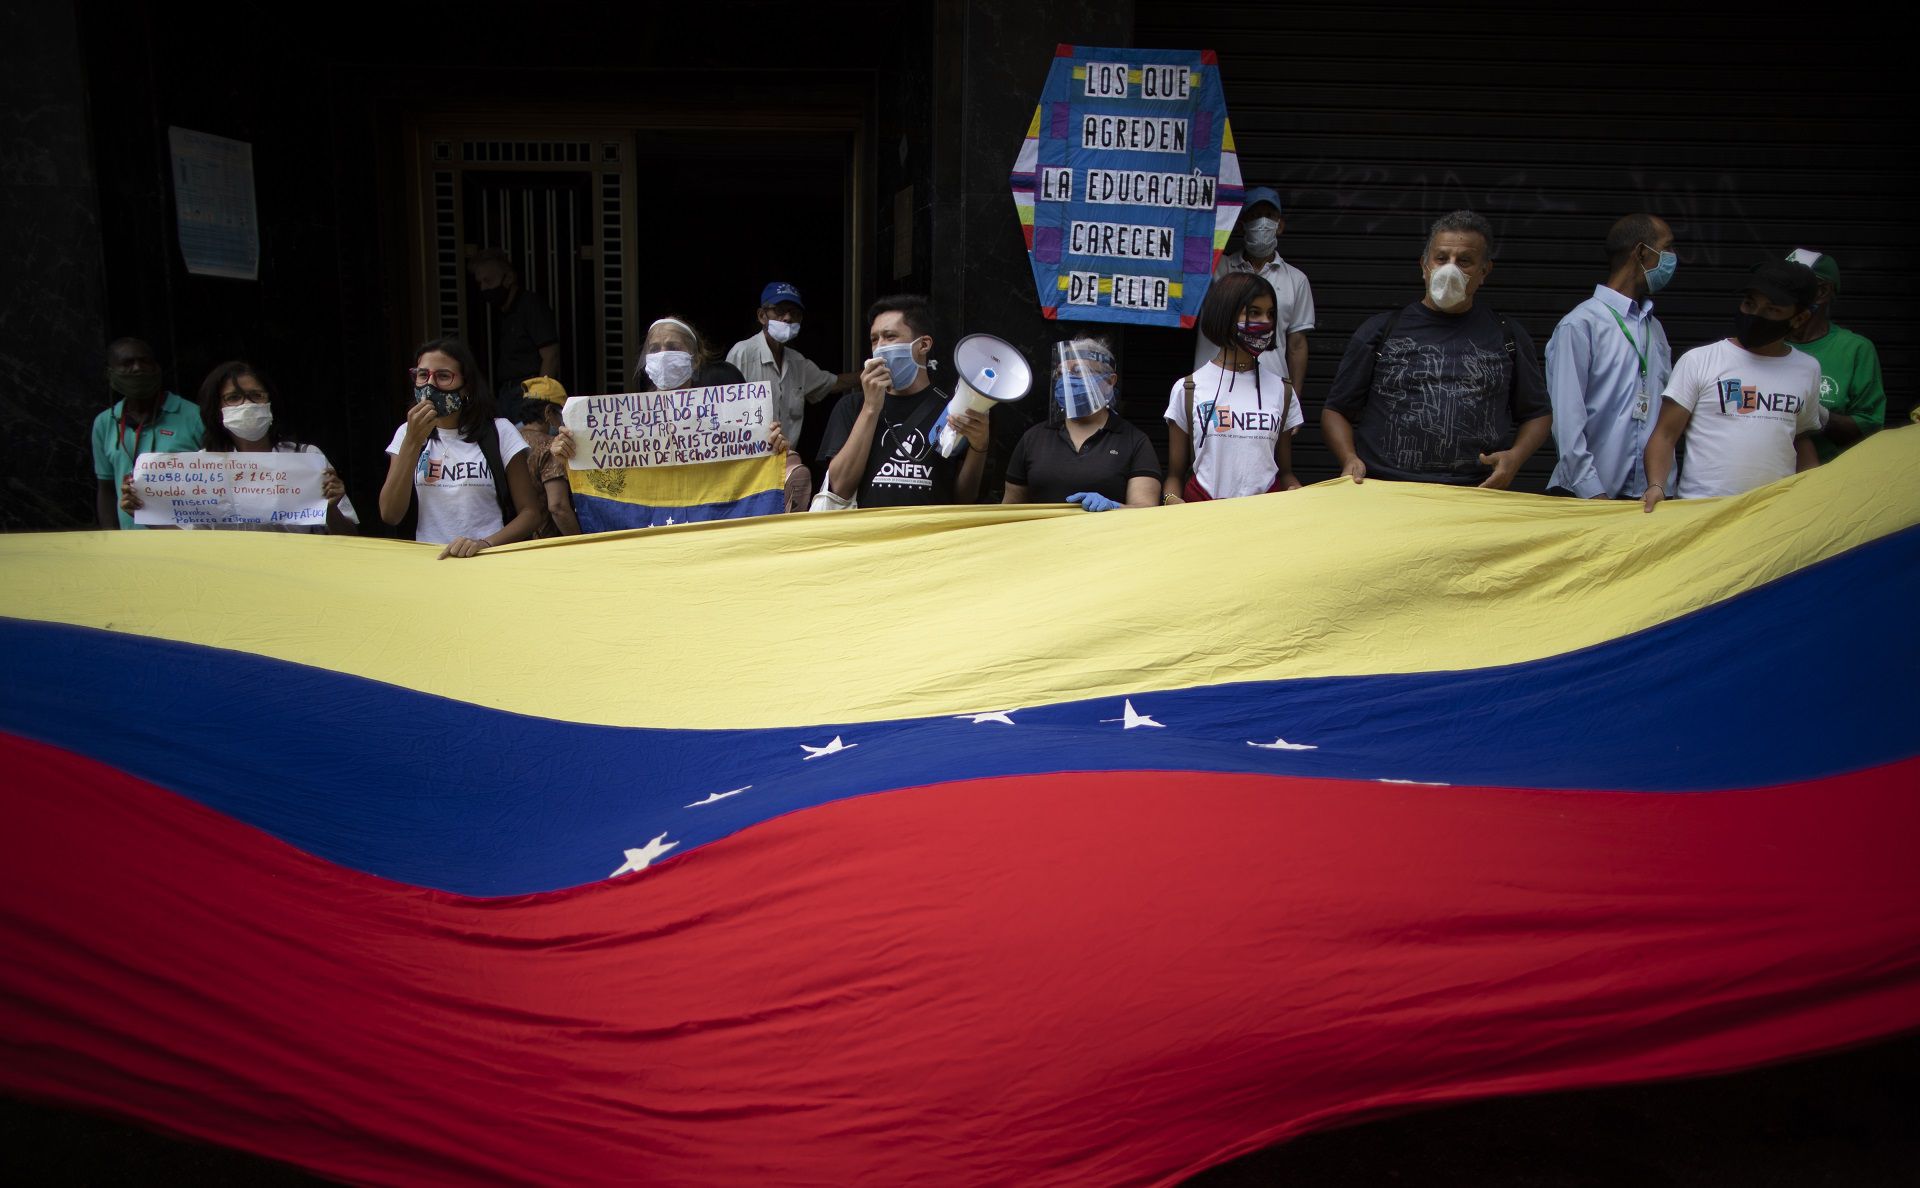 Protesters wave a Venezuelan flag during a demonstration by teachers, who make $2 dollars a month, to demand higher salaries in Caracas, Venezuela, Wednesday, Oct. 21, 2020. Amid the COVID-19 pandemic, some health workers also joined the protest and complained about their salaries of about $4 dollars a month. (AP Photo/Ariana Cubillos)